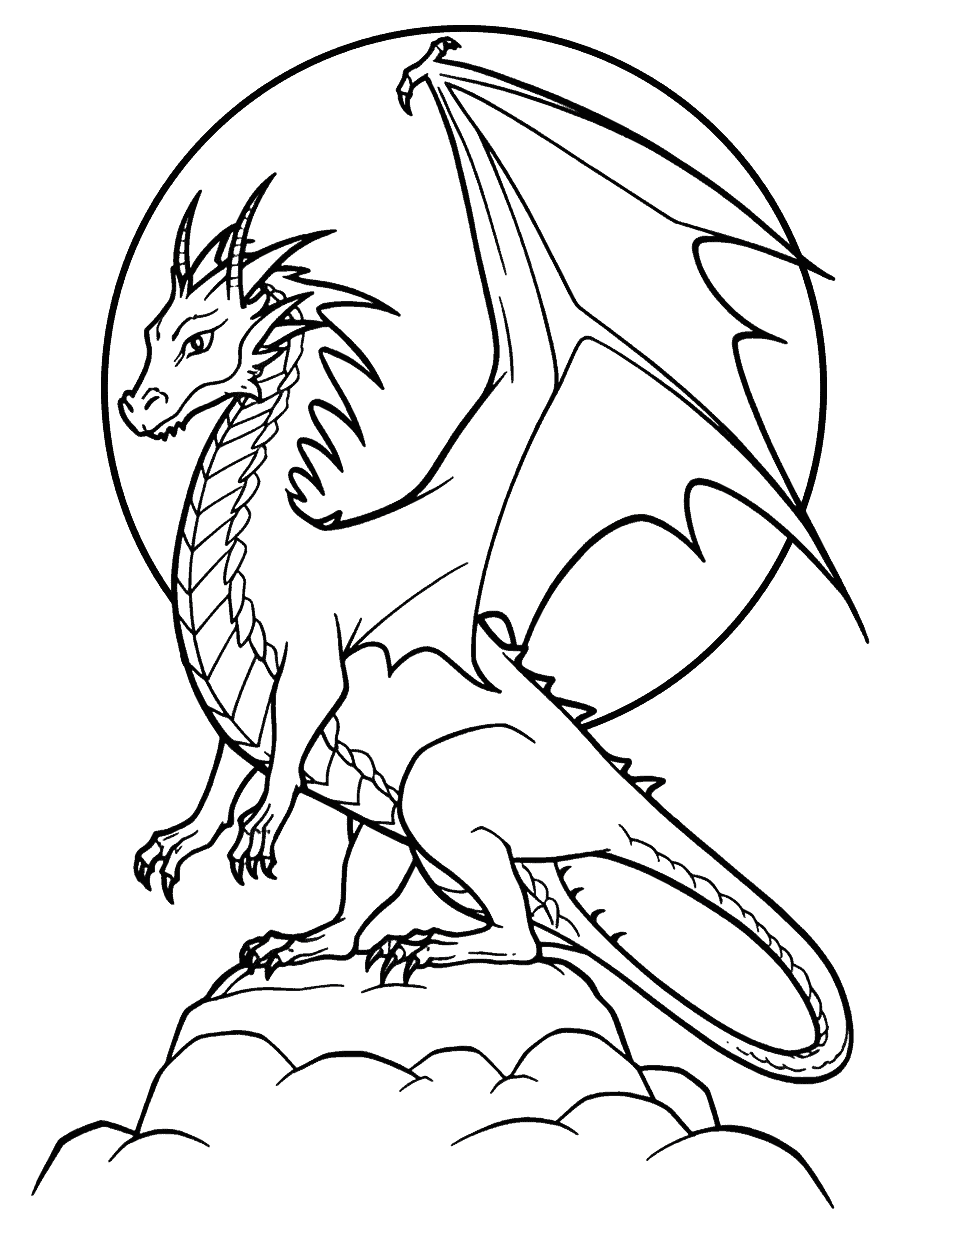 Nightwing Dragon Coloring Page - An ominous Nightwing dragon, silhouetted against a full moon.